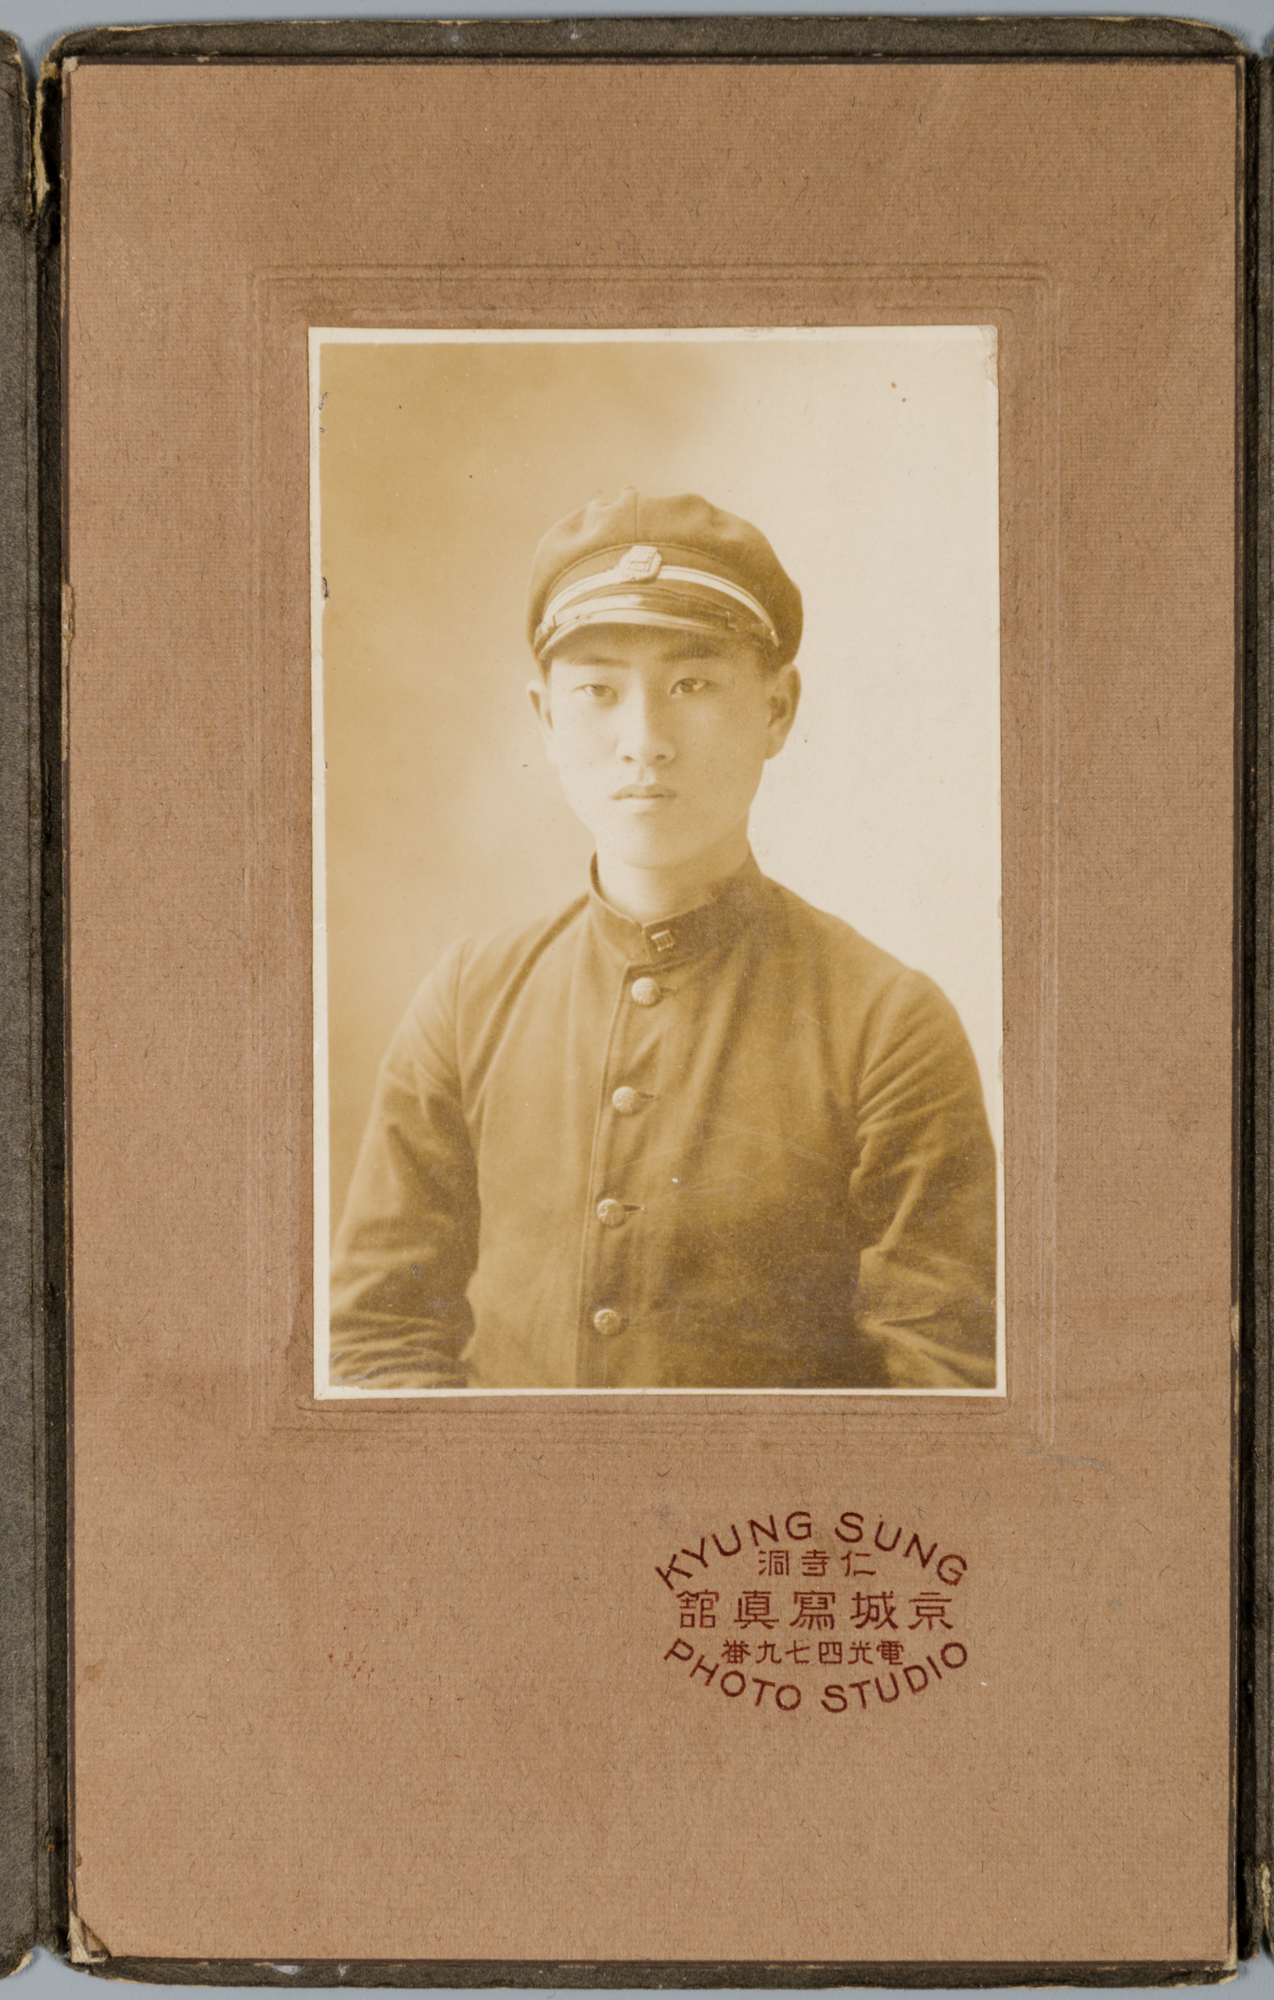 A portrait photo of a student taken at the Kyung Sung Photo Studio in the 1920s (Research Institute of Photographic Archives)